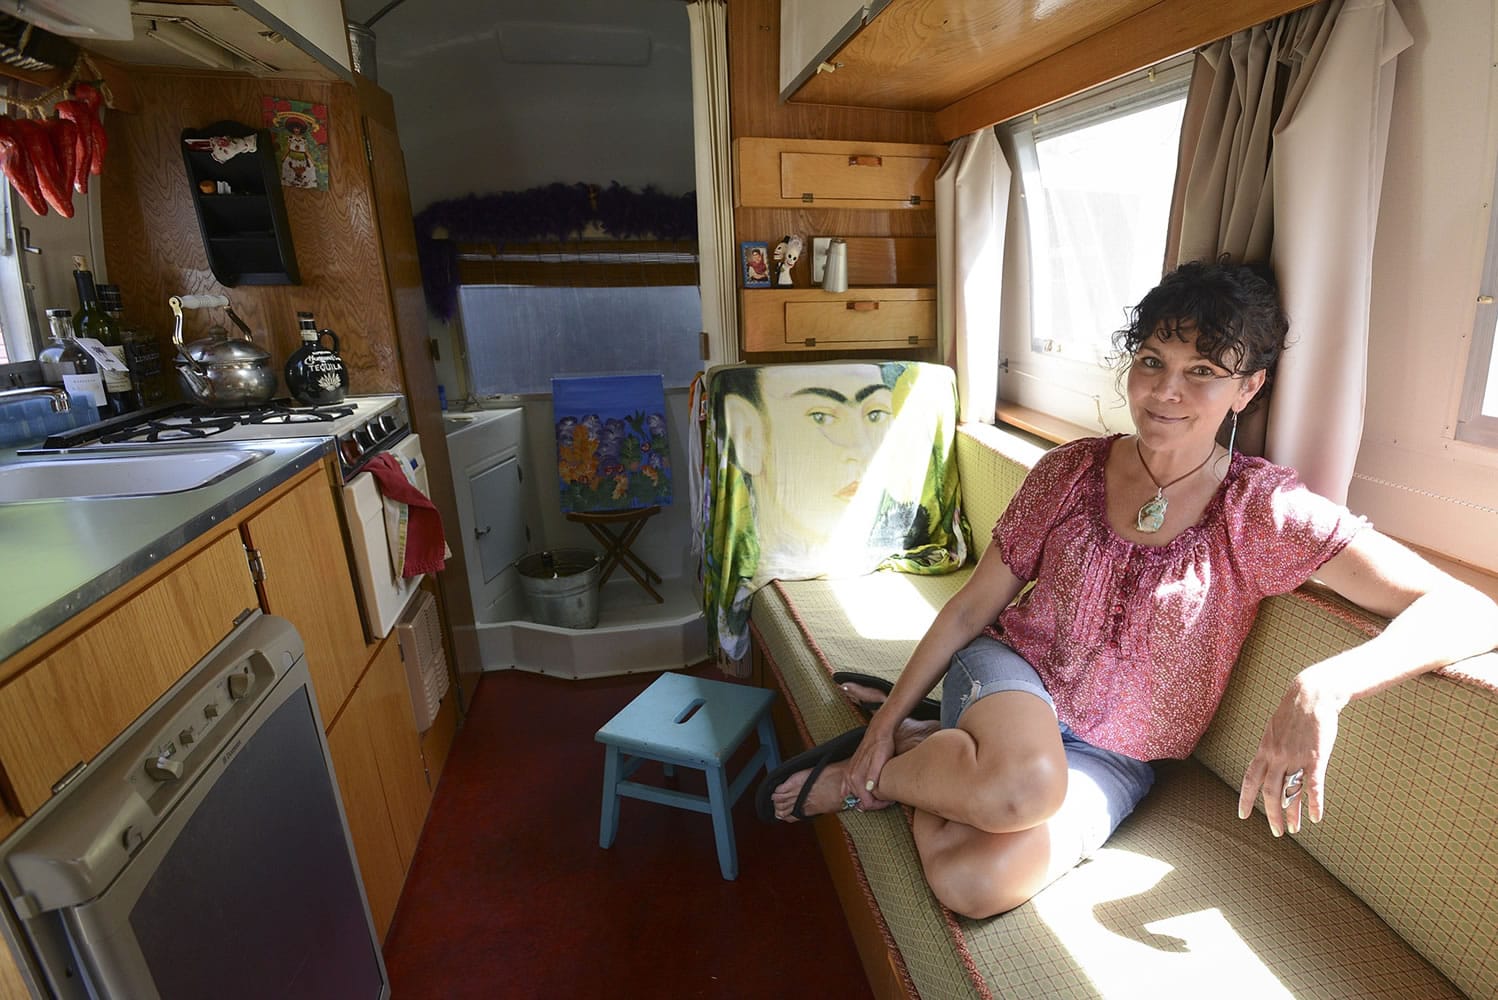 Bartender Deanna Wohlgemuth provides bar service at weddings and private parties from her 1965 Airstream camper, dubbed the Tin Cantina.